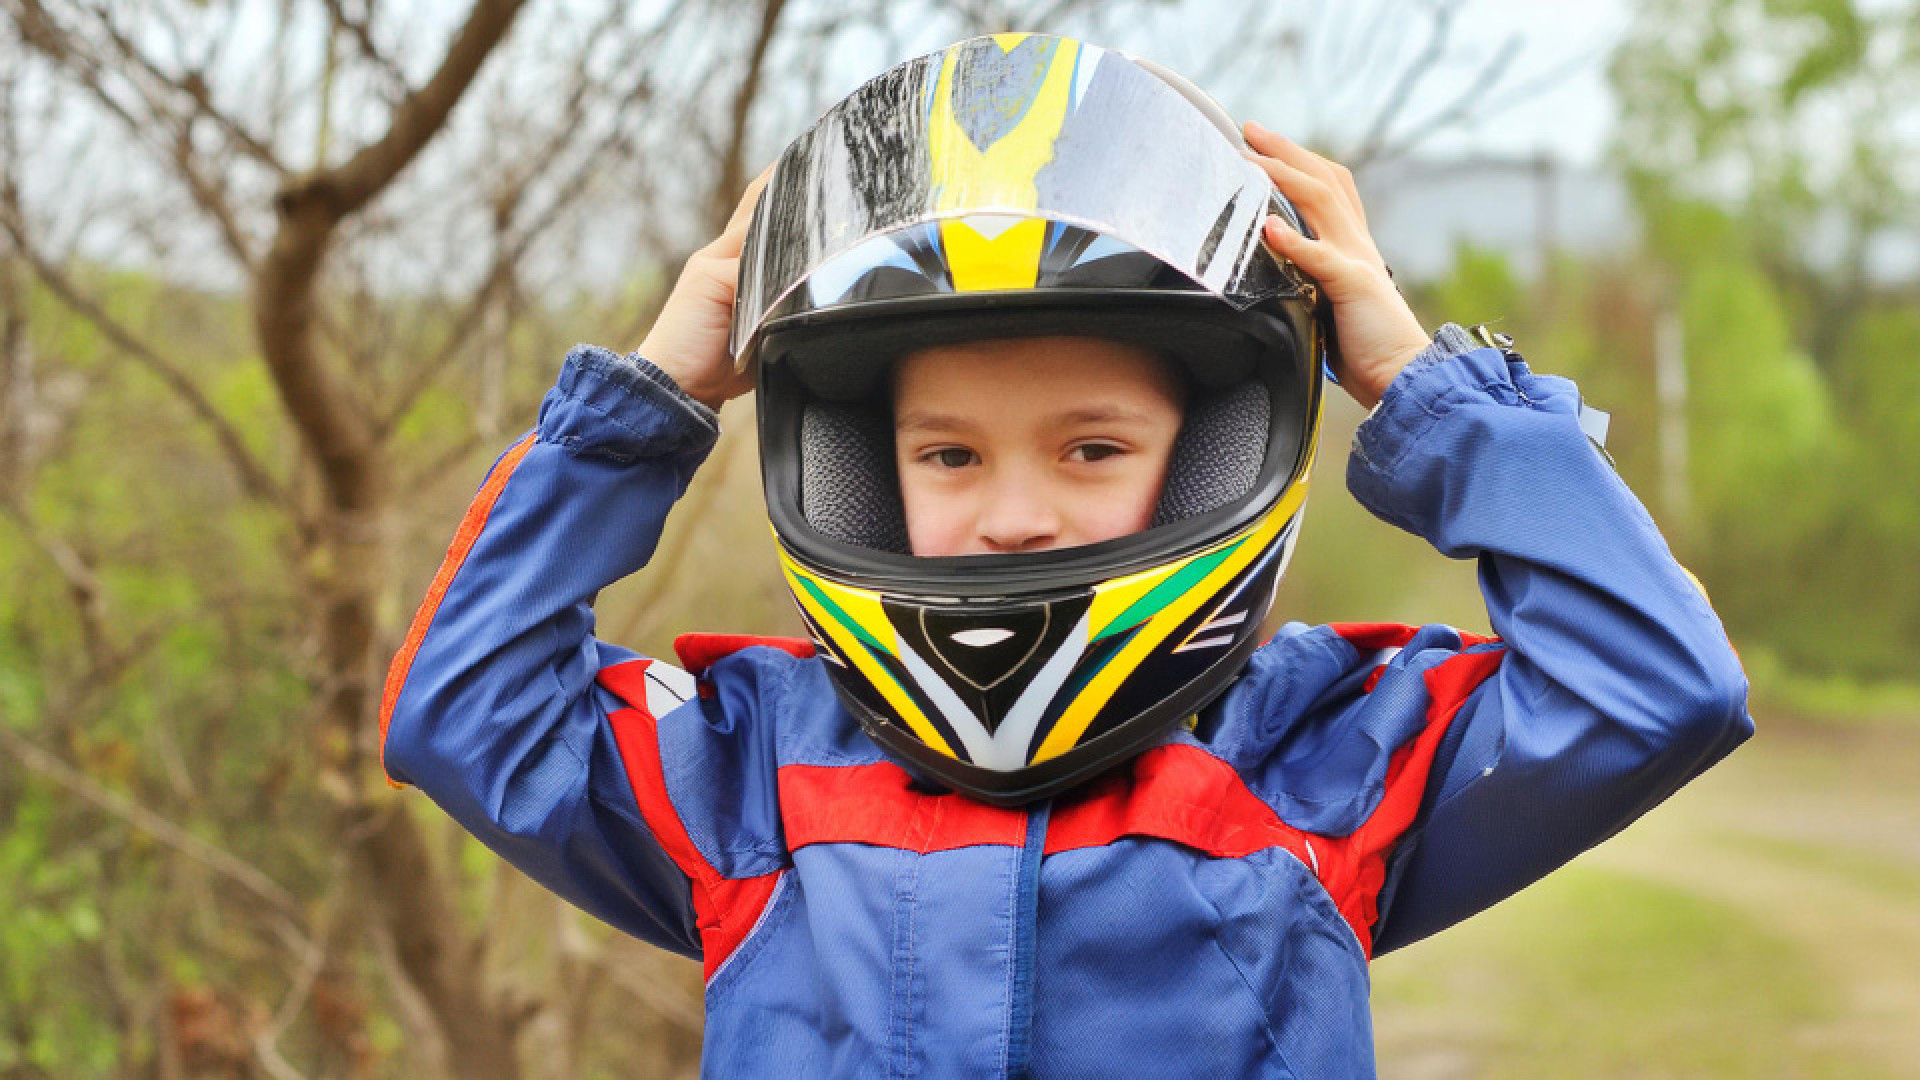 https://www.raceleathers.co.uk/image/cache/catalog/Blog%20Images/How%20Do%20I%20Know%20My%20Childs%20Helmet%20Size-1920x1080.jpg